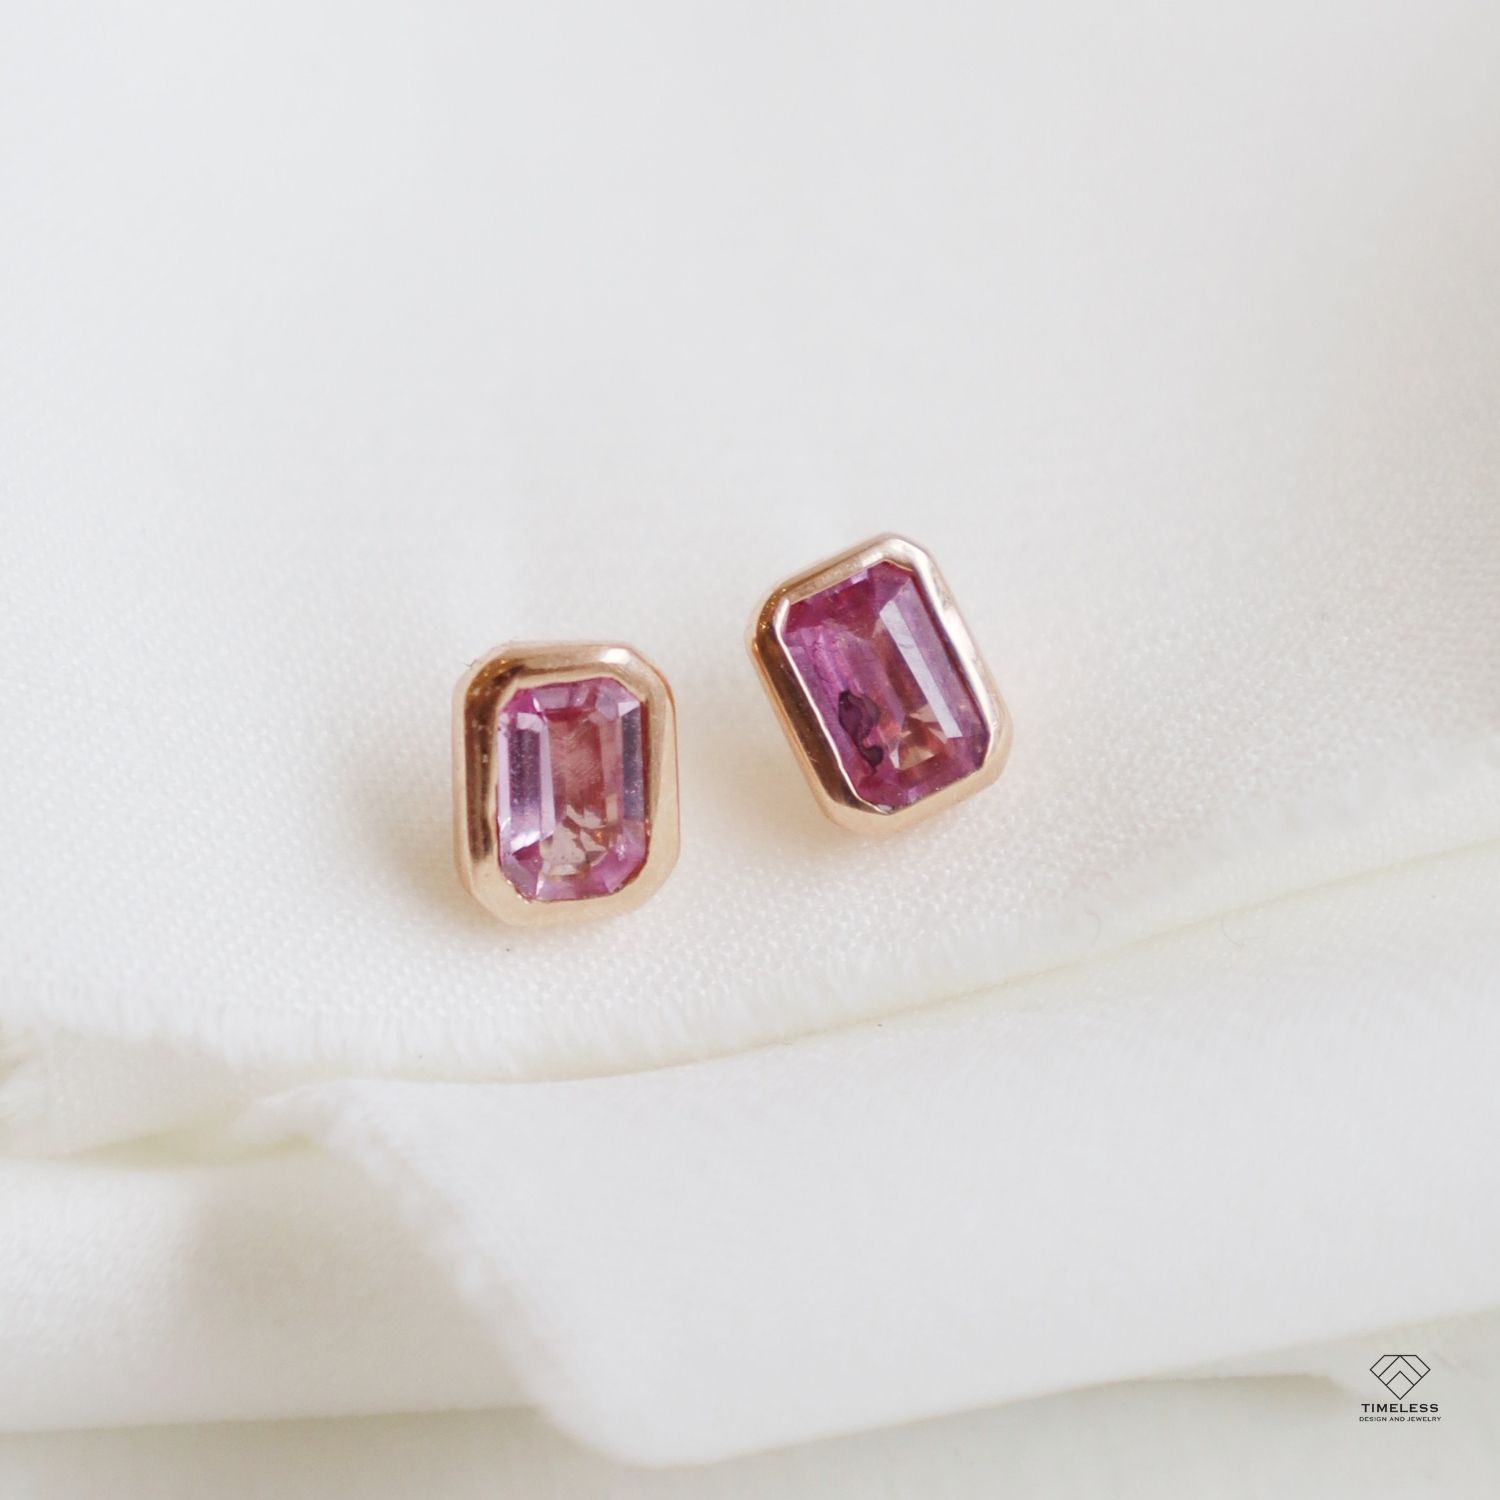 Custom Birthstone Earrings in Salt Lake City by Timeless Design and Jewelry